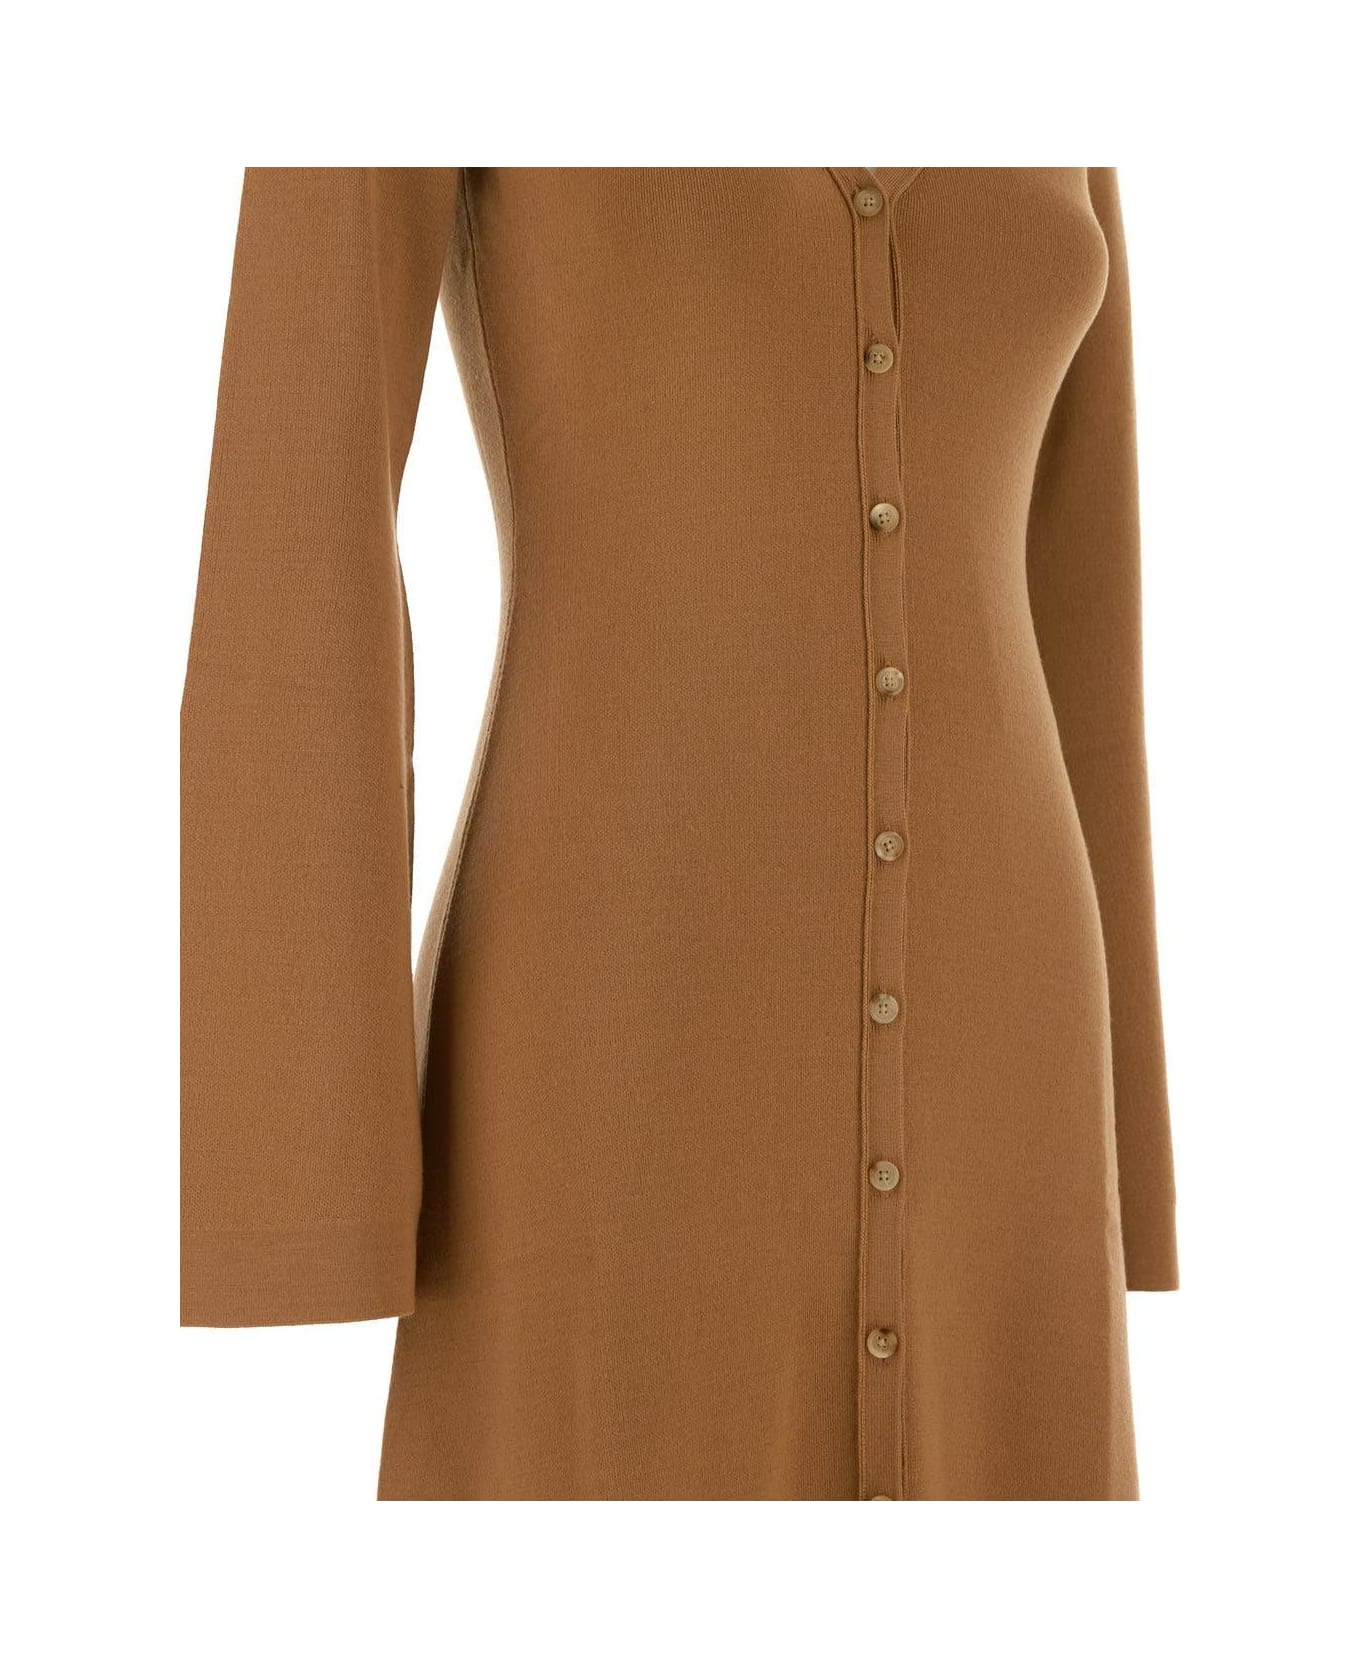 Chloé Dress With Buttons - Beige